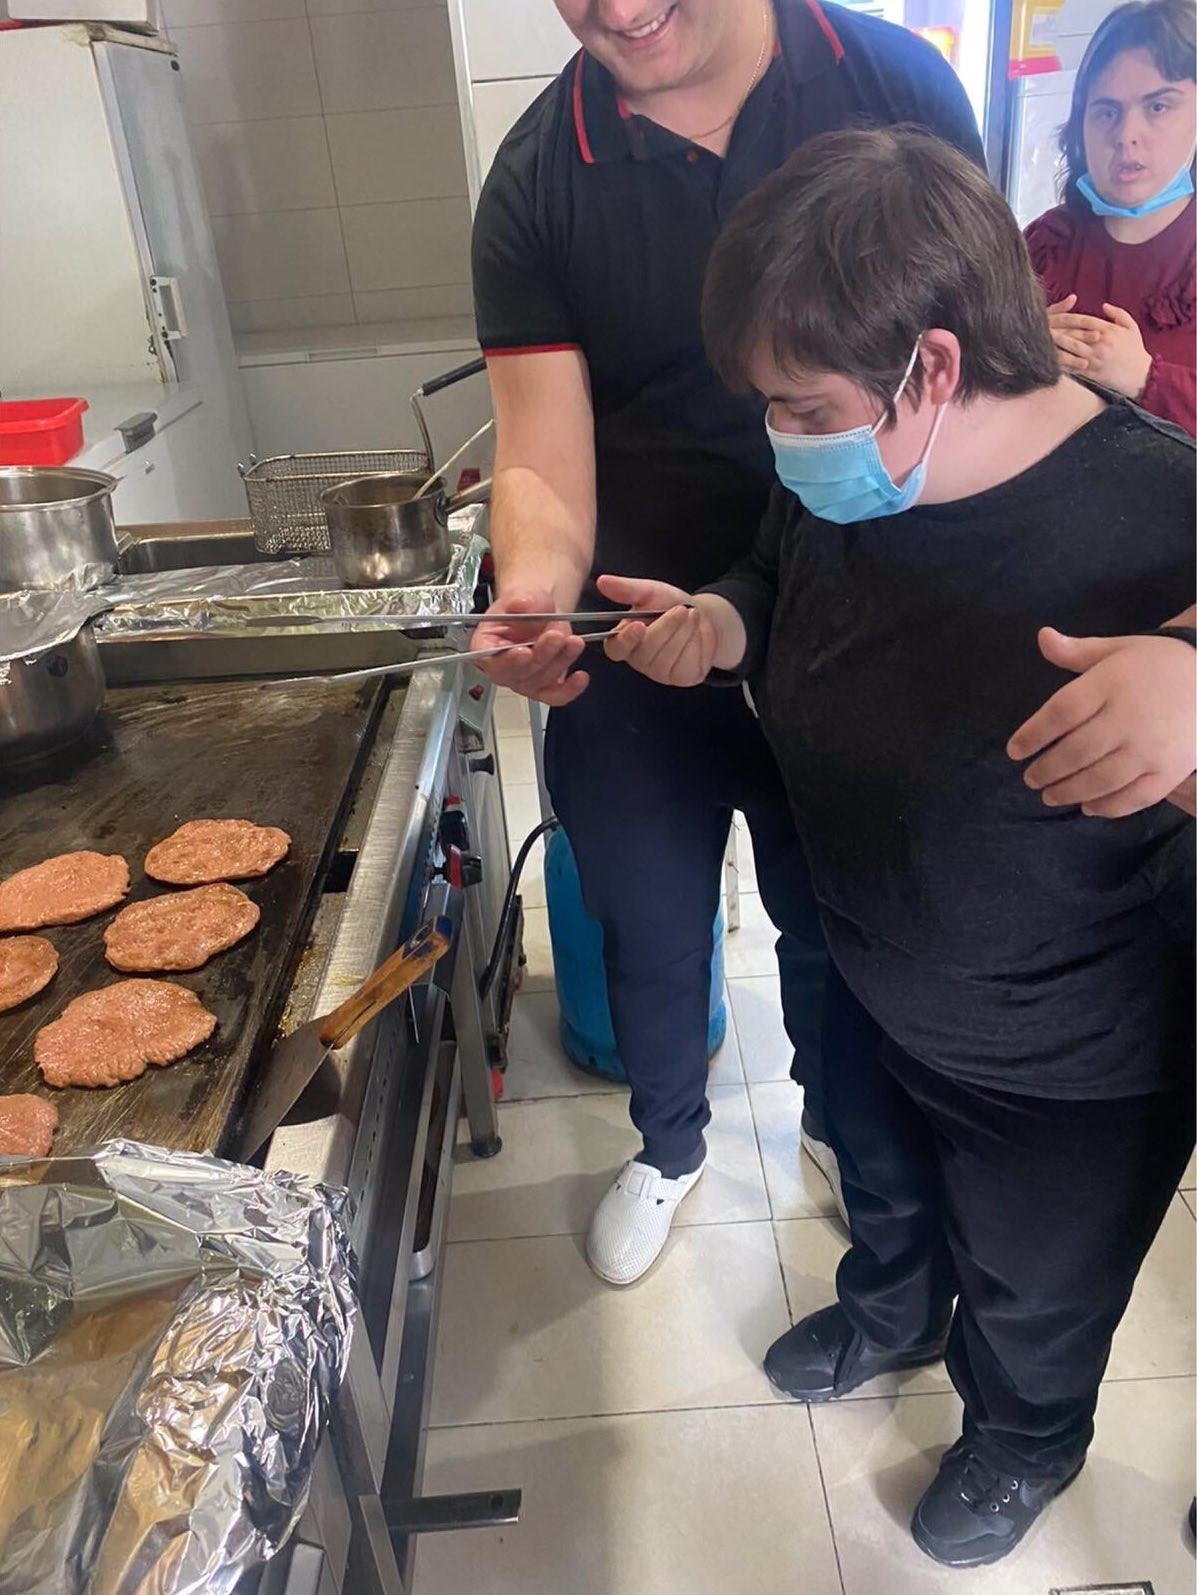 Culinary training for people with disabilities